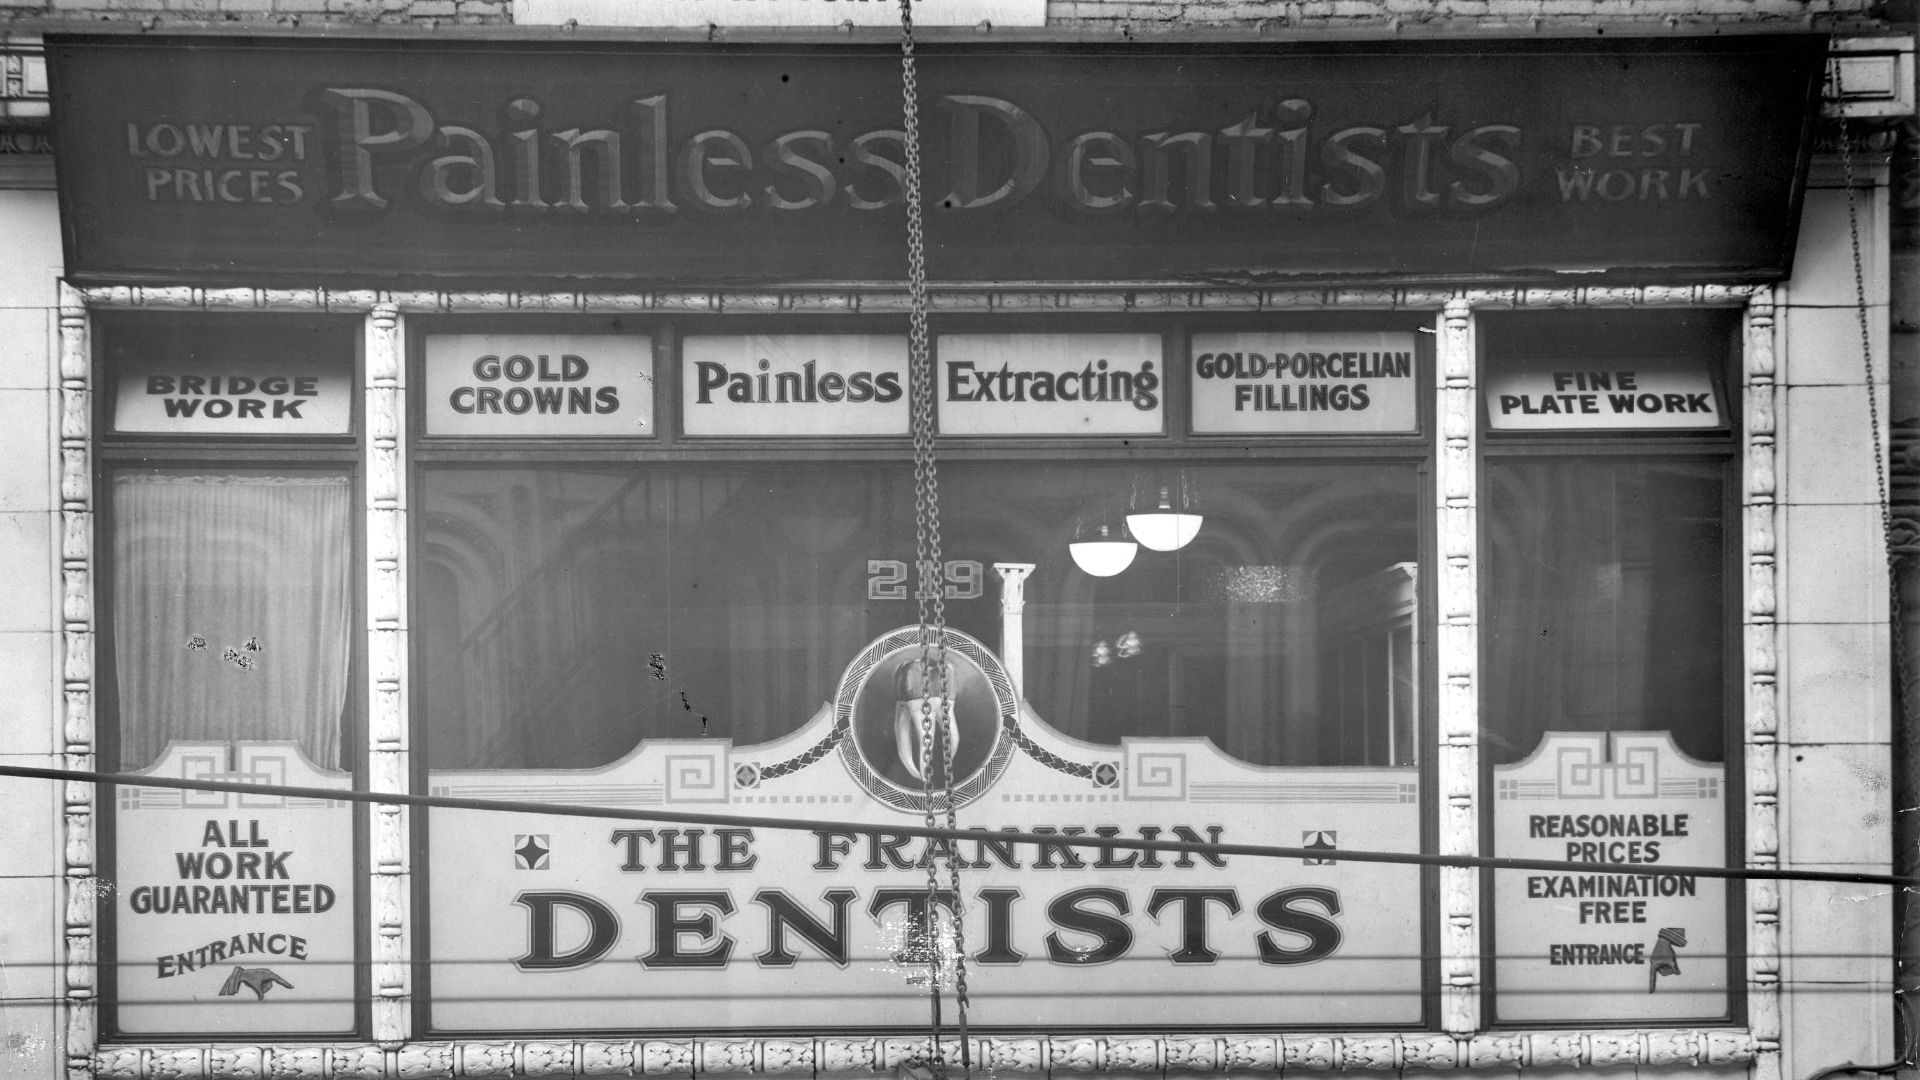 Fascia sign and numerous pieces of window signage advertising the "Painless Dentists".